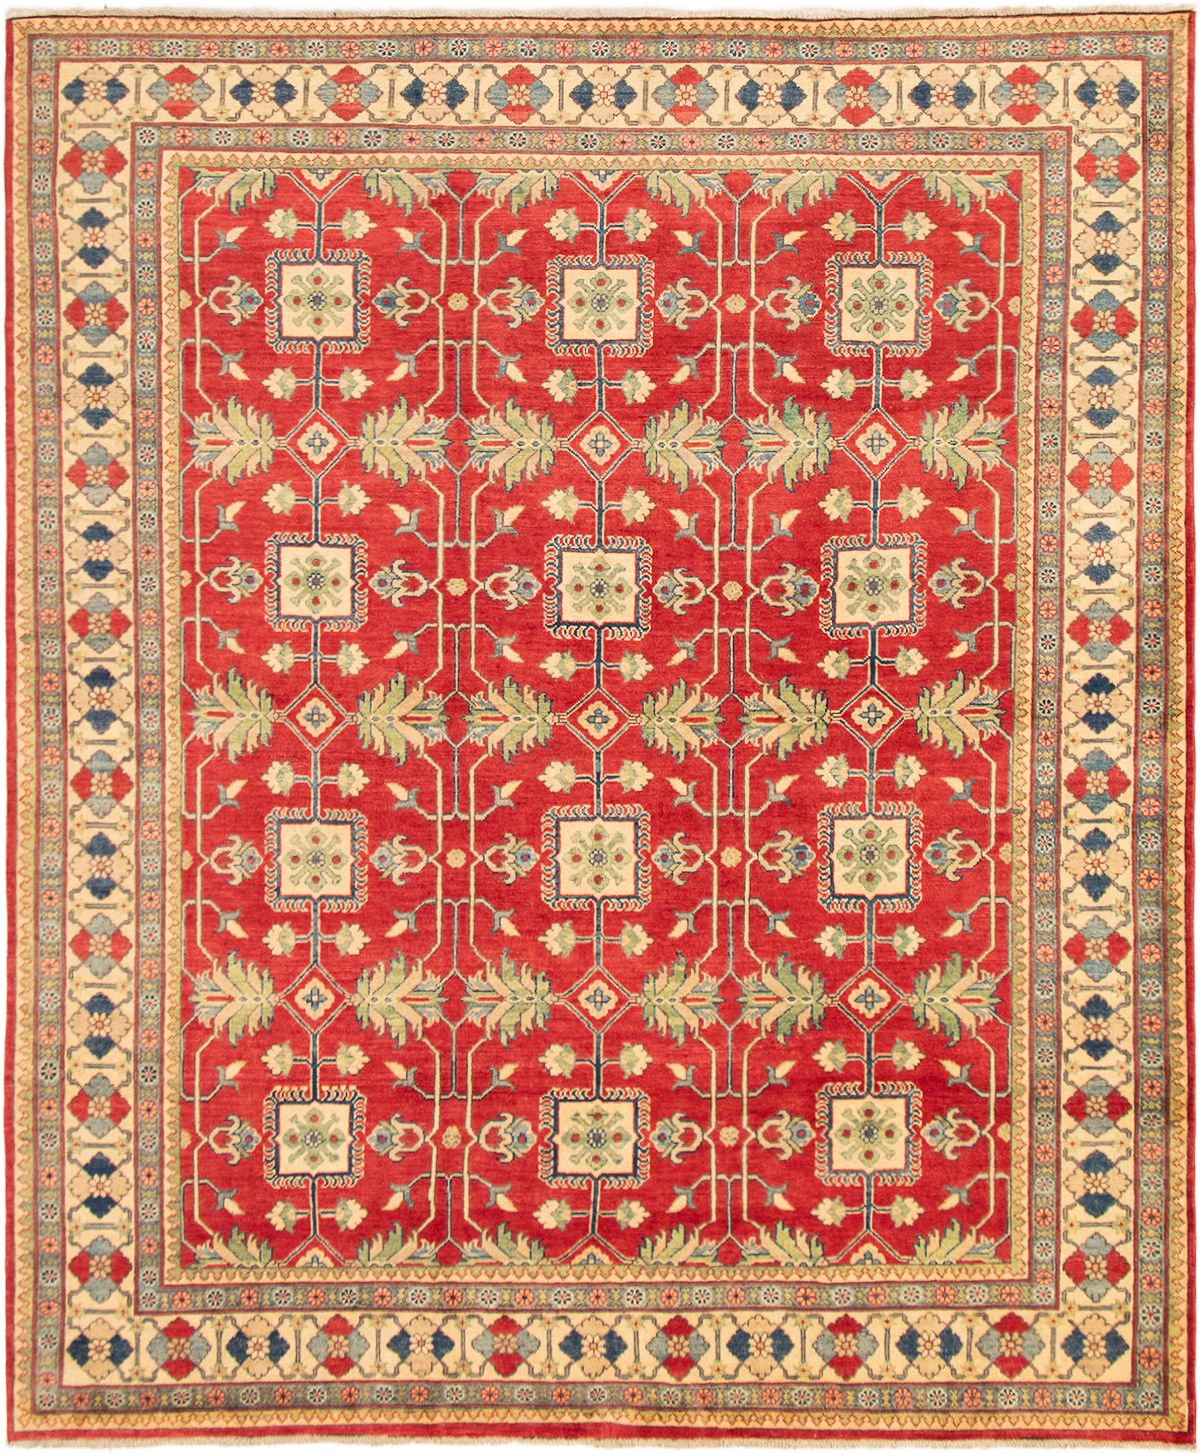 Hand-knotted Finest Gazni Red Wool Rug 8'3" x 9'11"  Size: 8'3" x 9'11"  